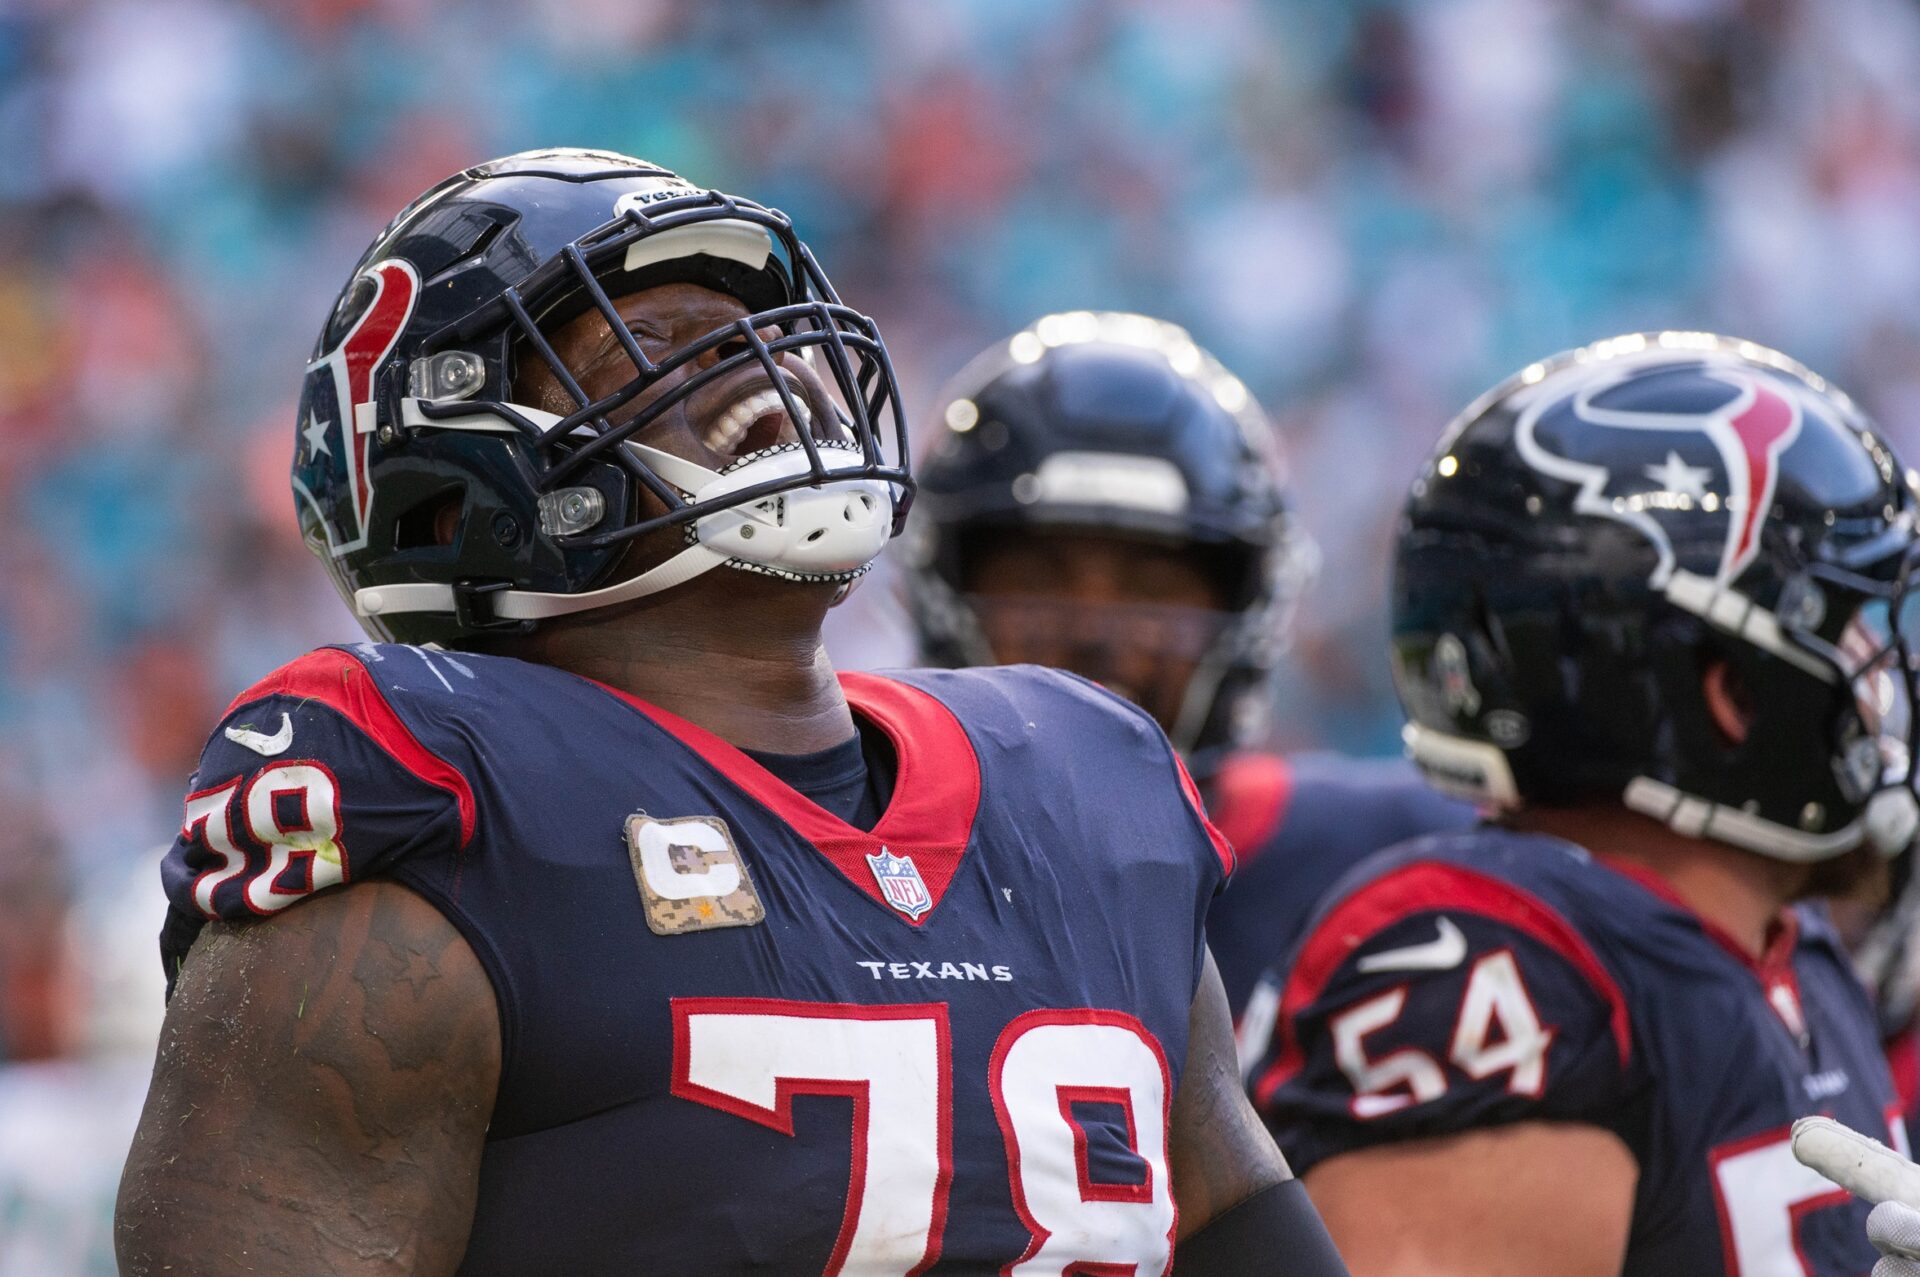 Laremy Tunsil (78) yells after the Texans failed to score on a two-point conversion attempt in the second half of the game between host Miami Dolphins and the Houston Texans.